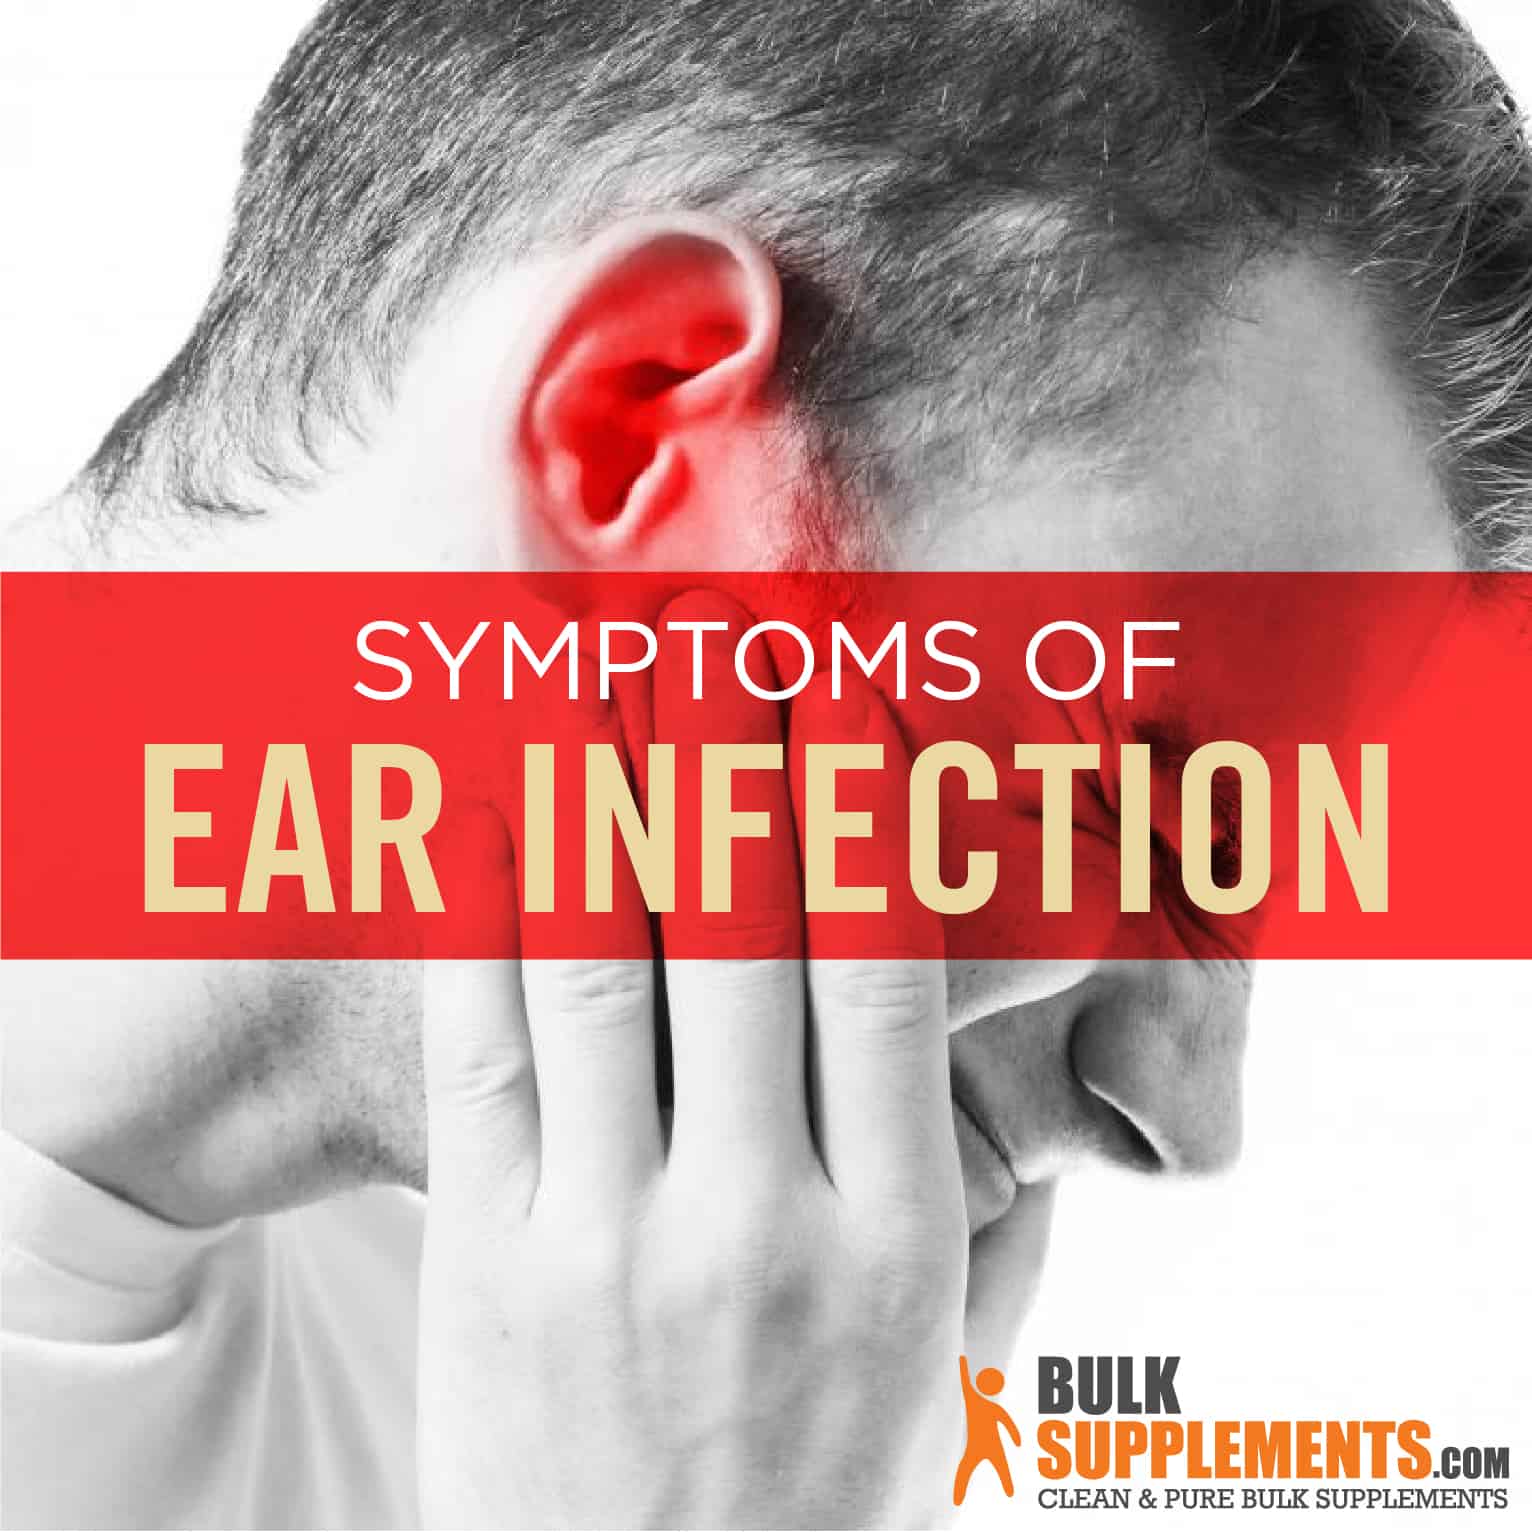 Ear Infection